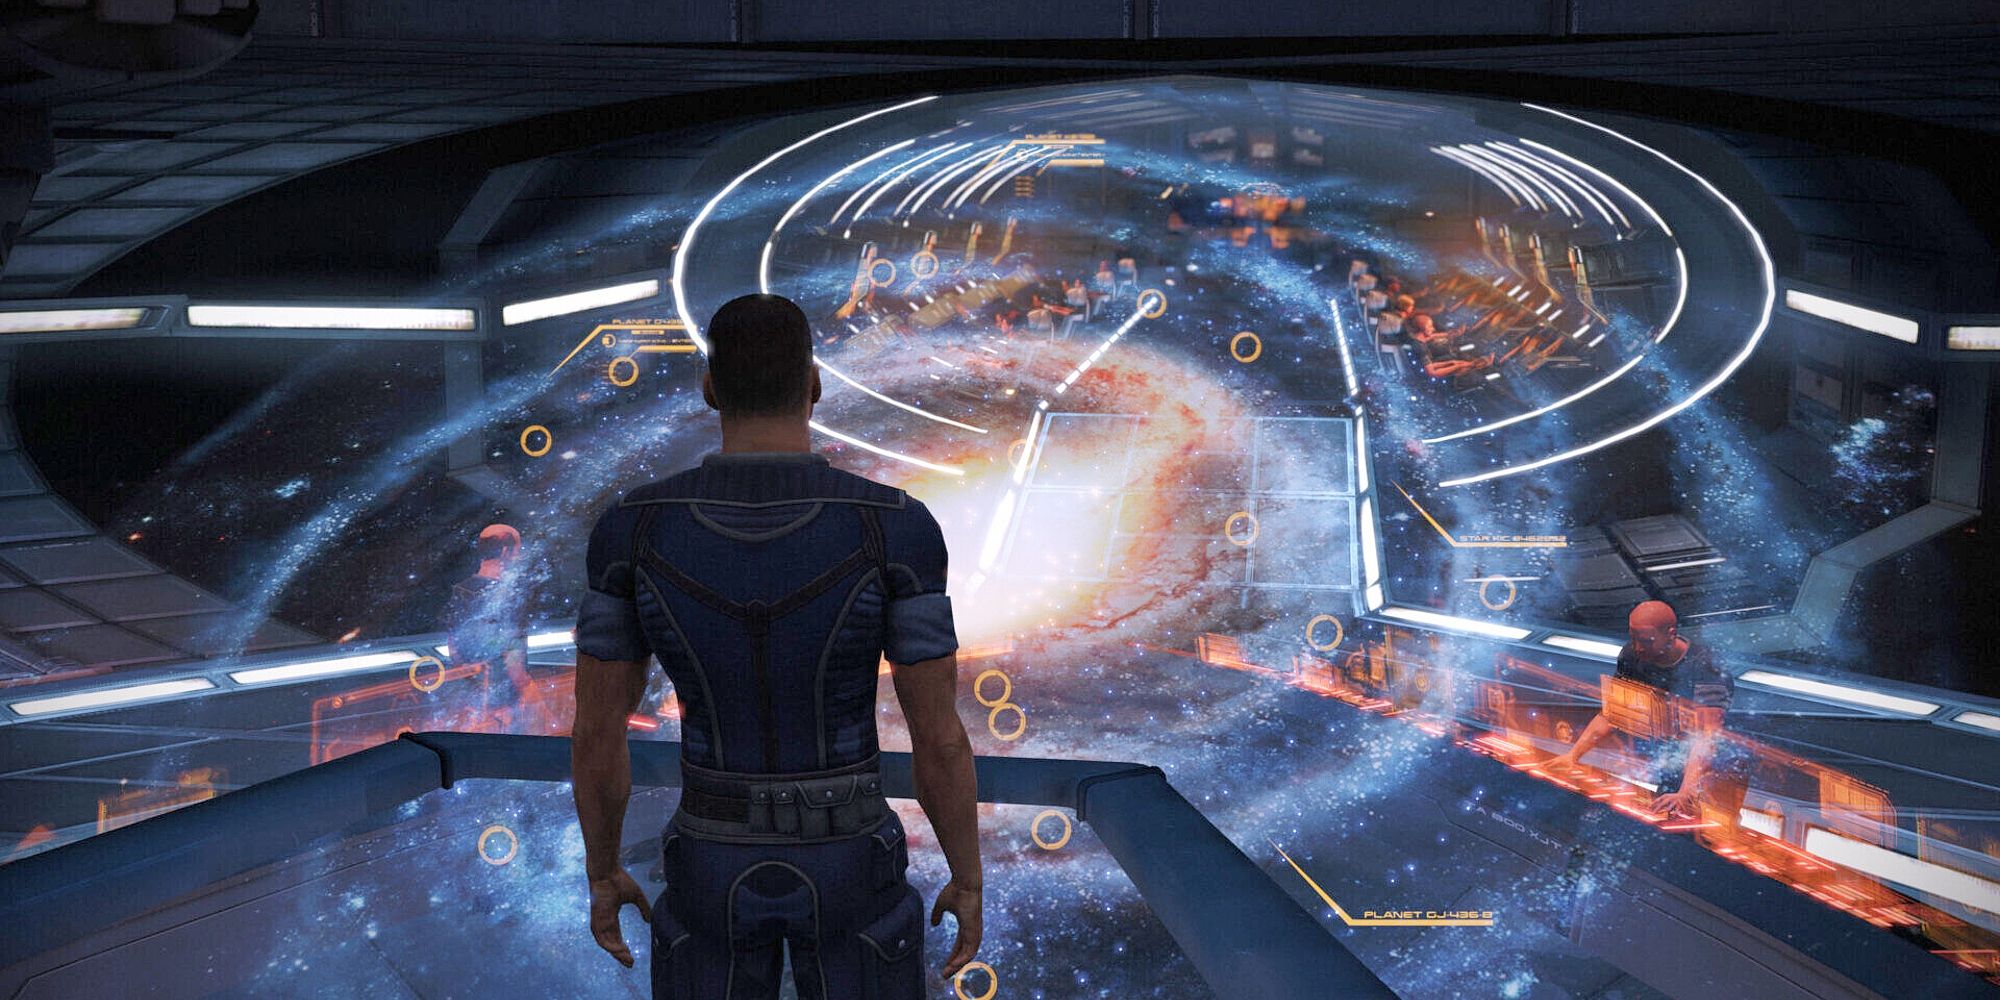 Image of Commander Shepard on the bridge of the Normandy SR-1 viewing the holographic galaxy map.